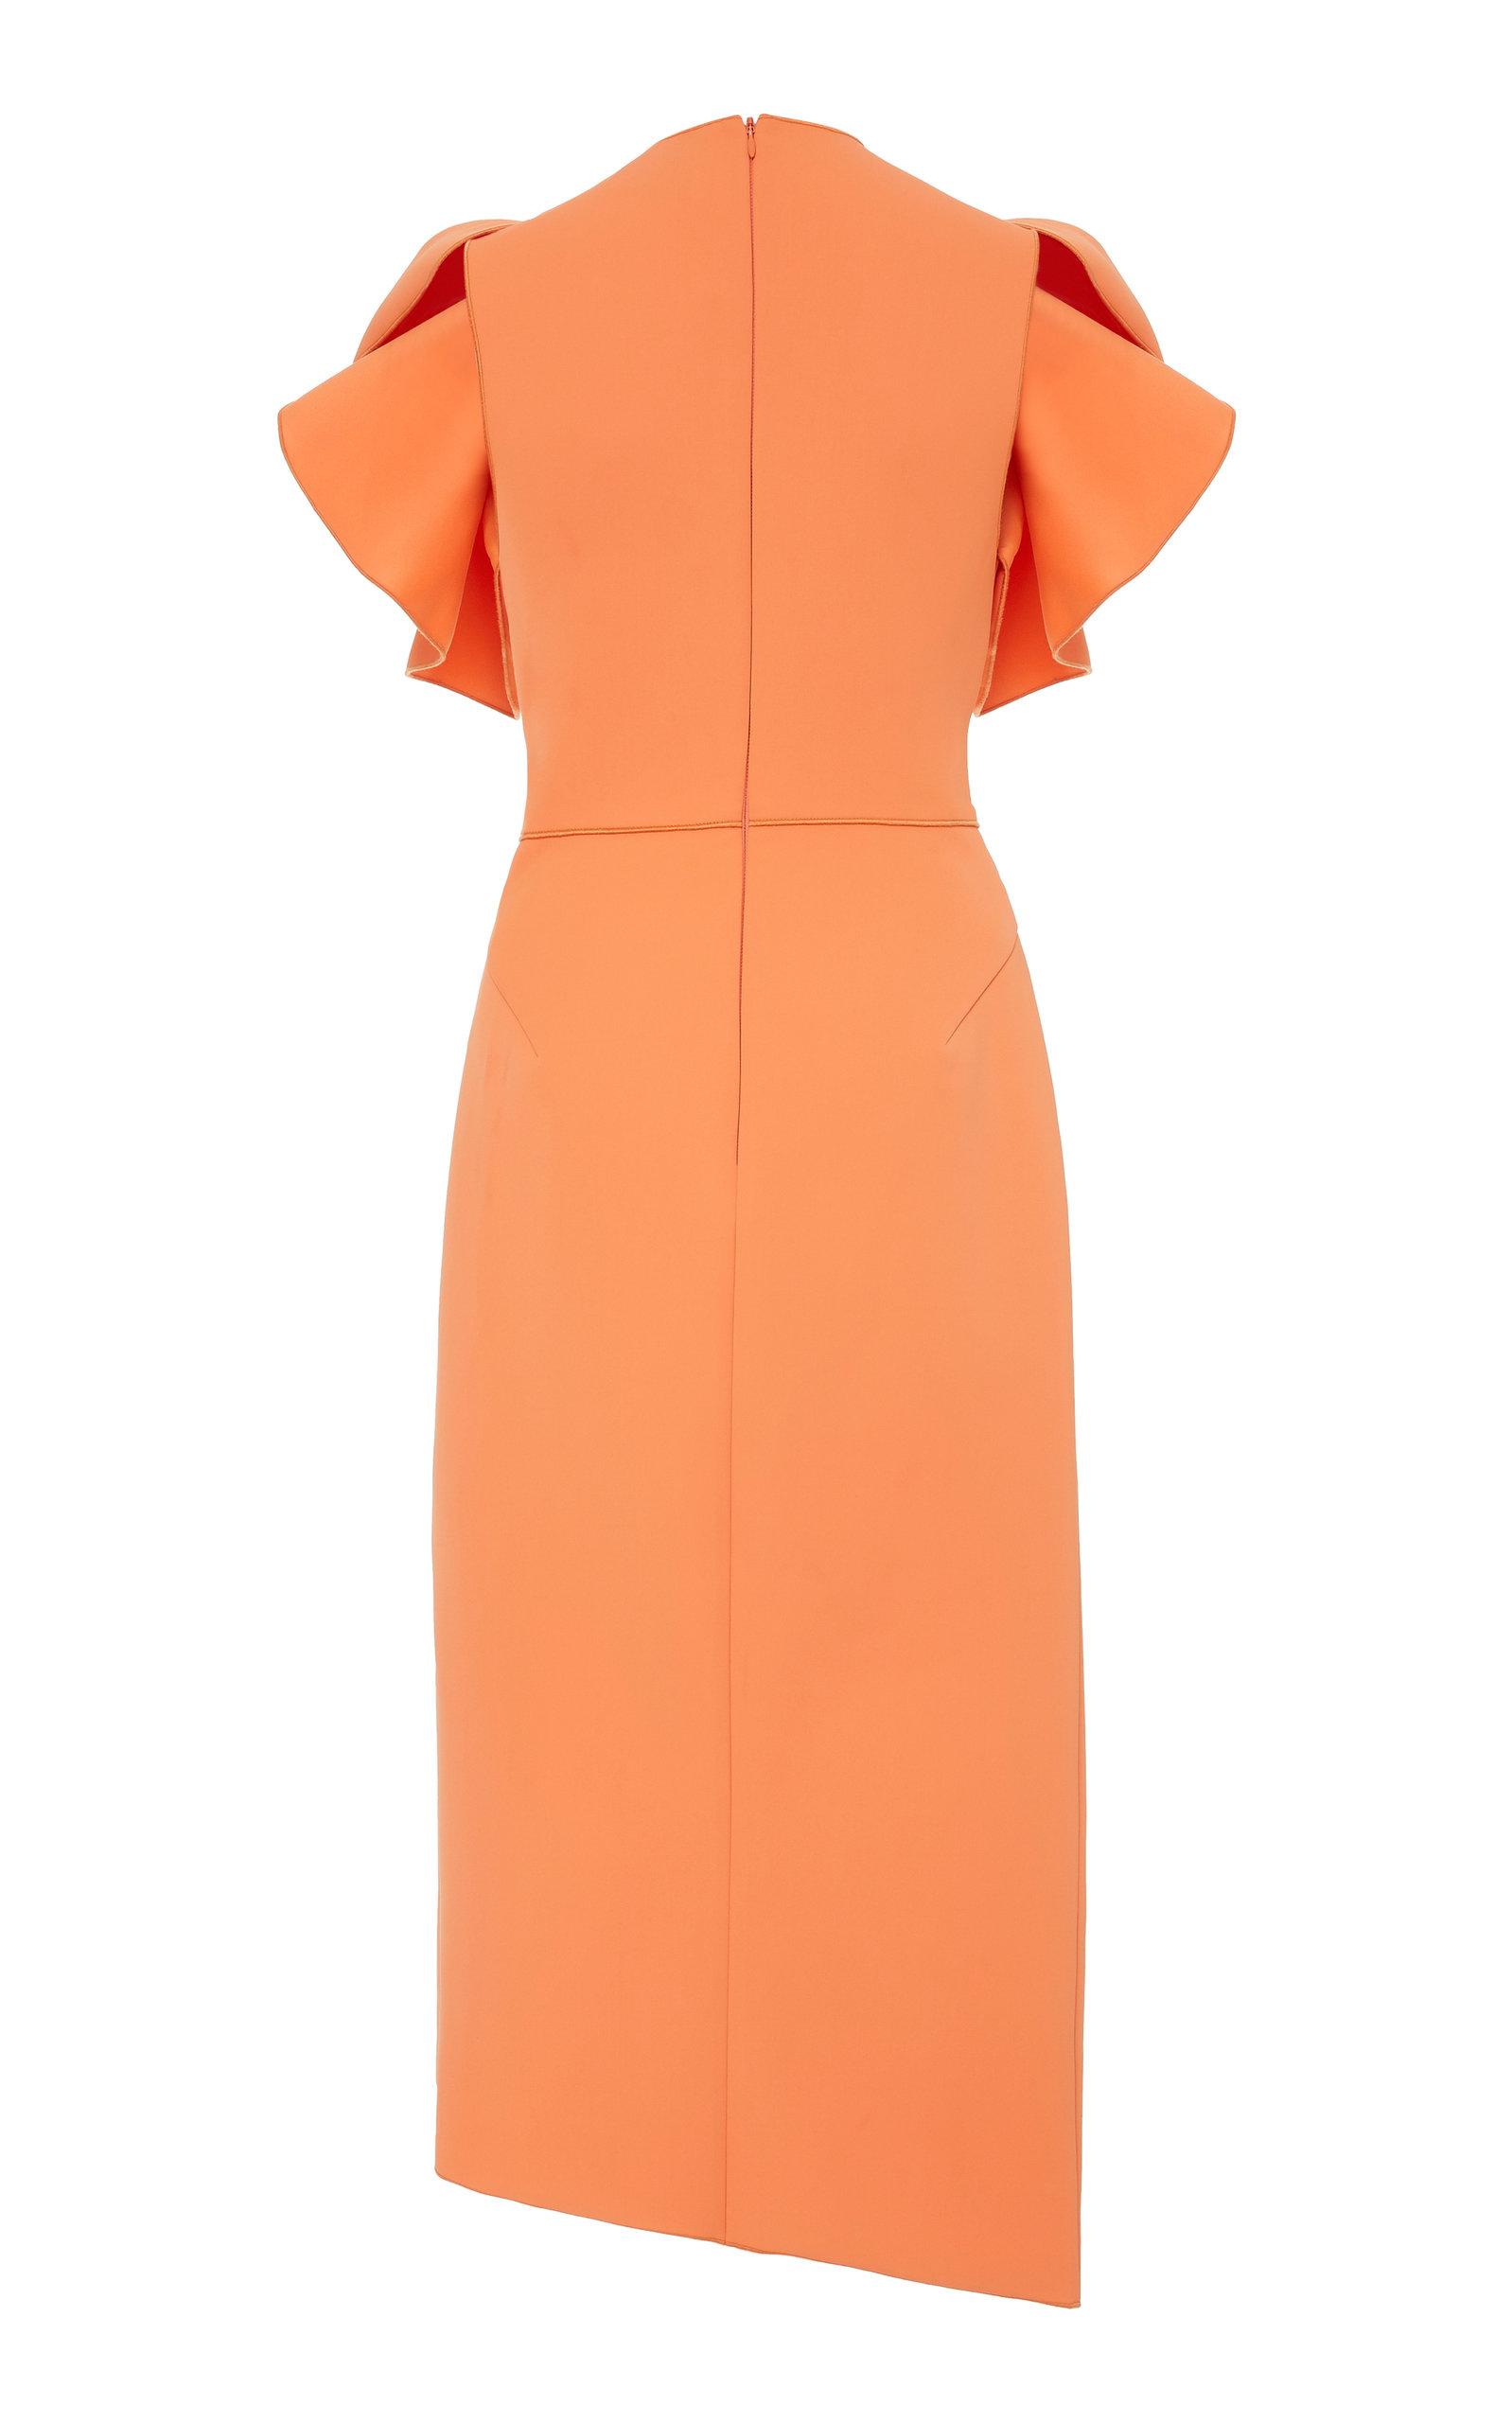 Acler Synthetic Redwood Gathered Midi Dress in Orange - Lyst